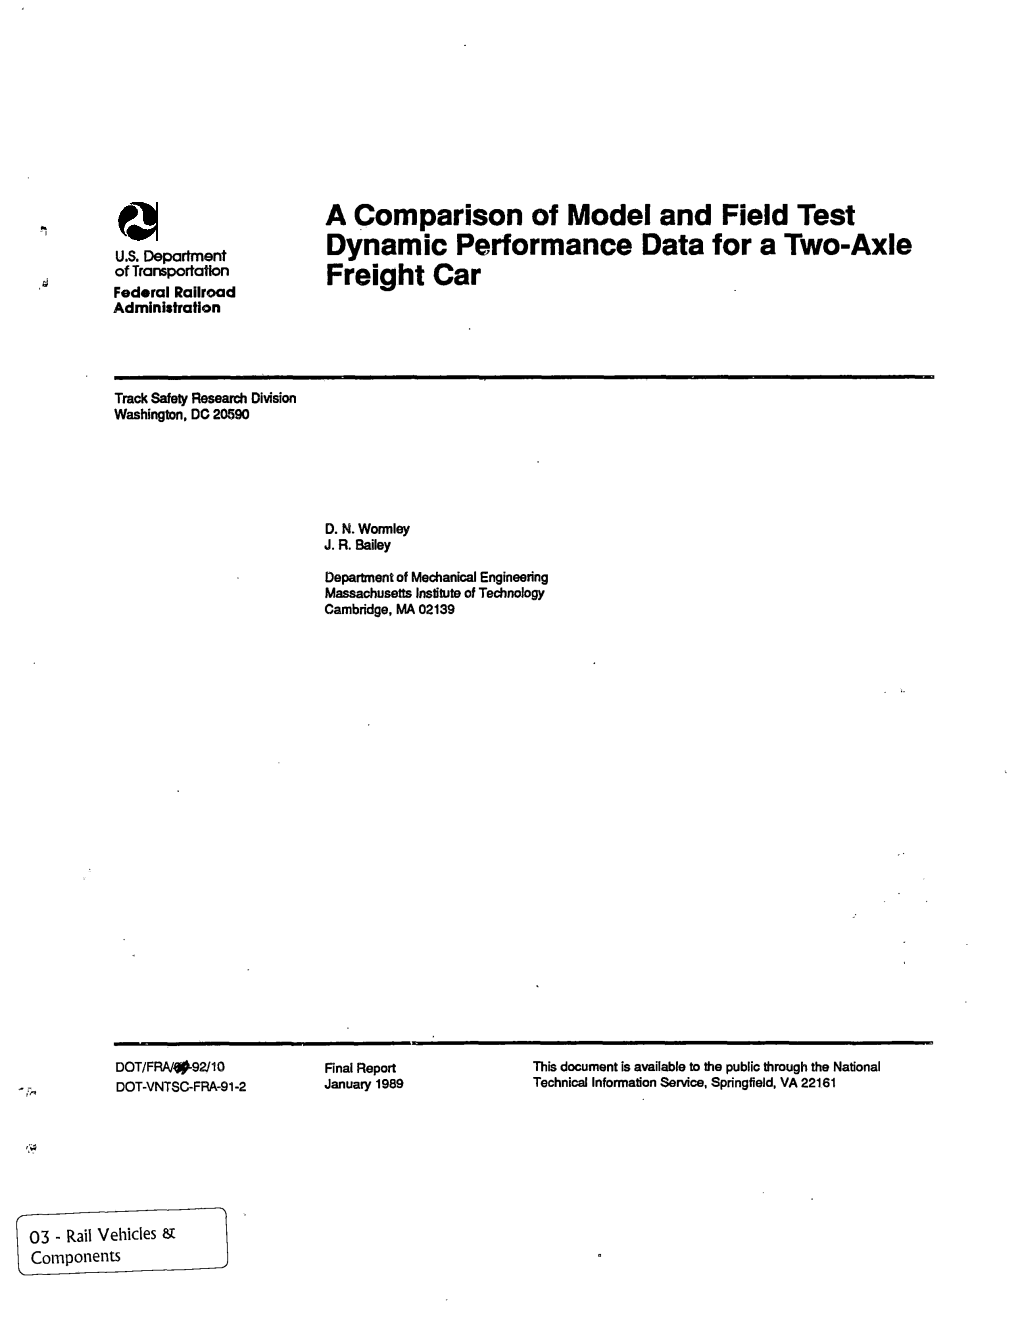 A Comparison of Model and Field Test